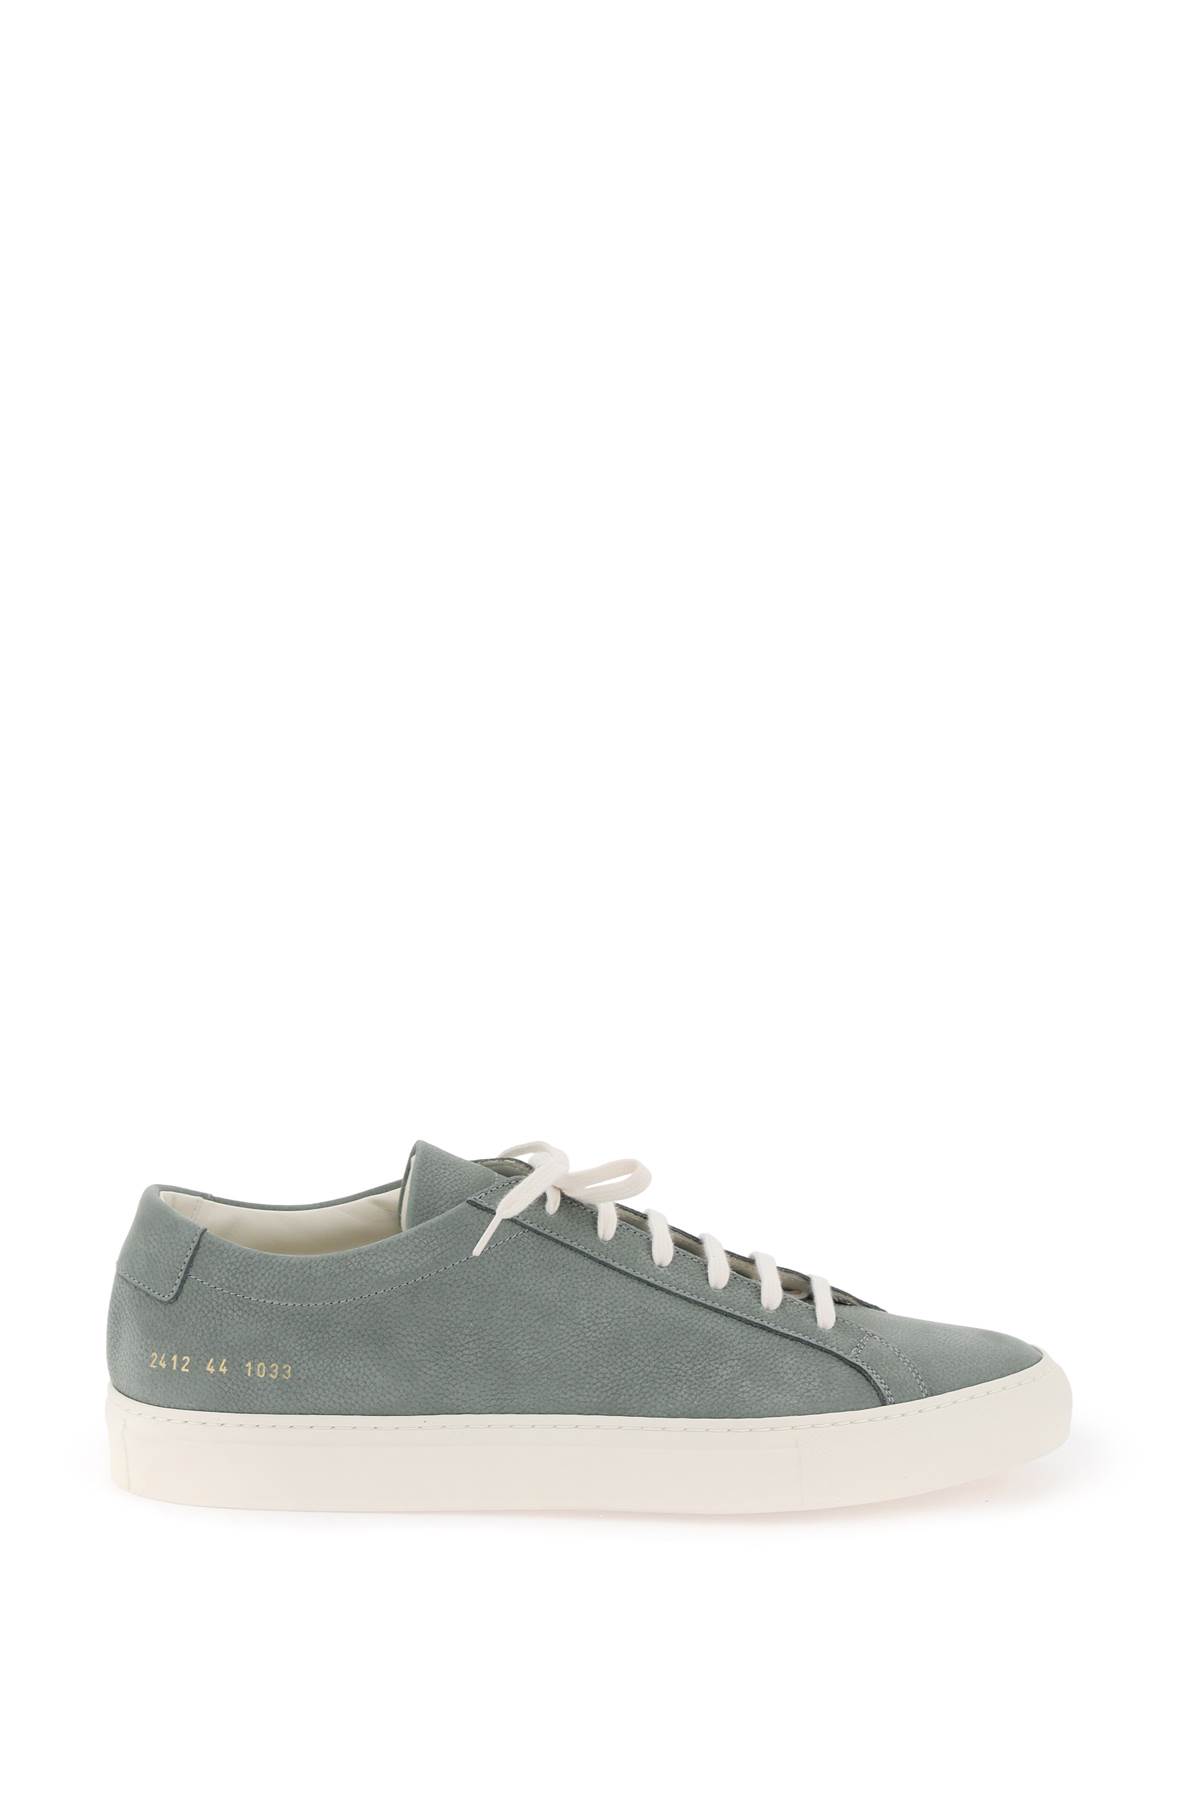 Shop Common Projects Original Achilles Leather Sneakers In Sage (green)